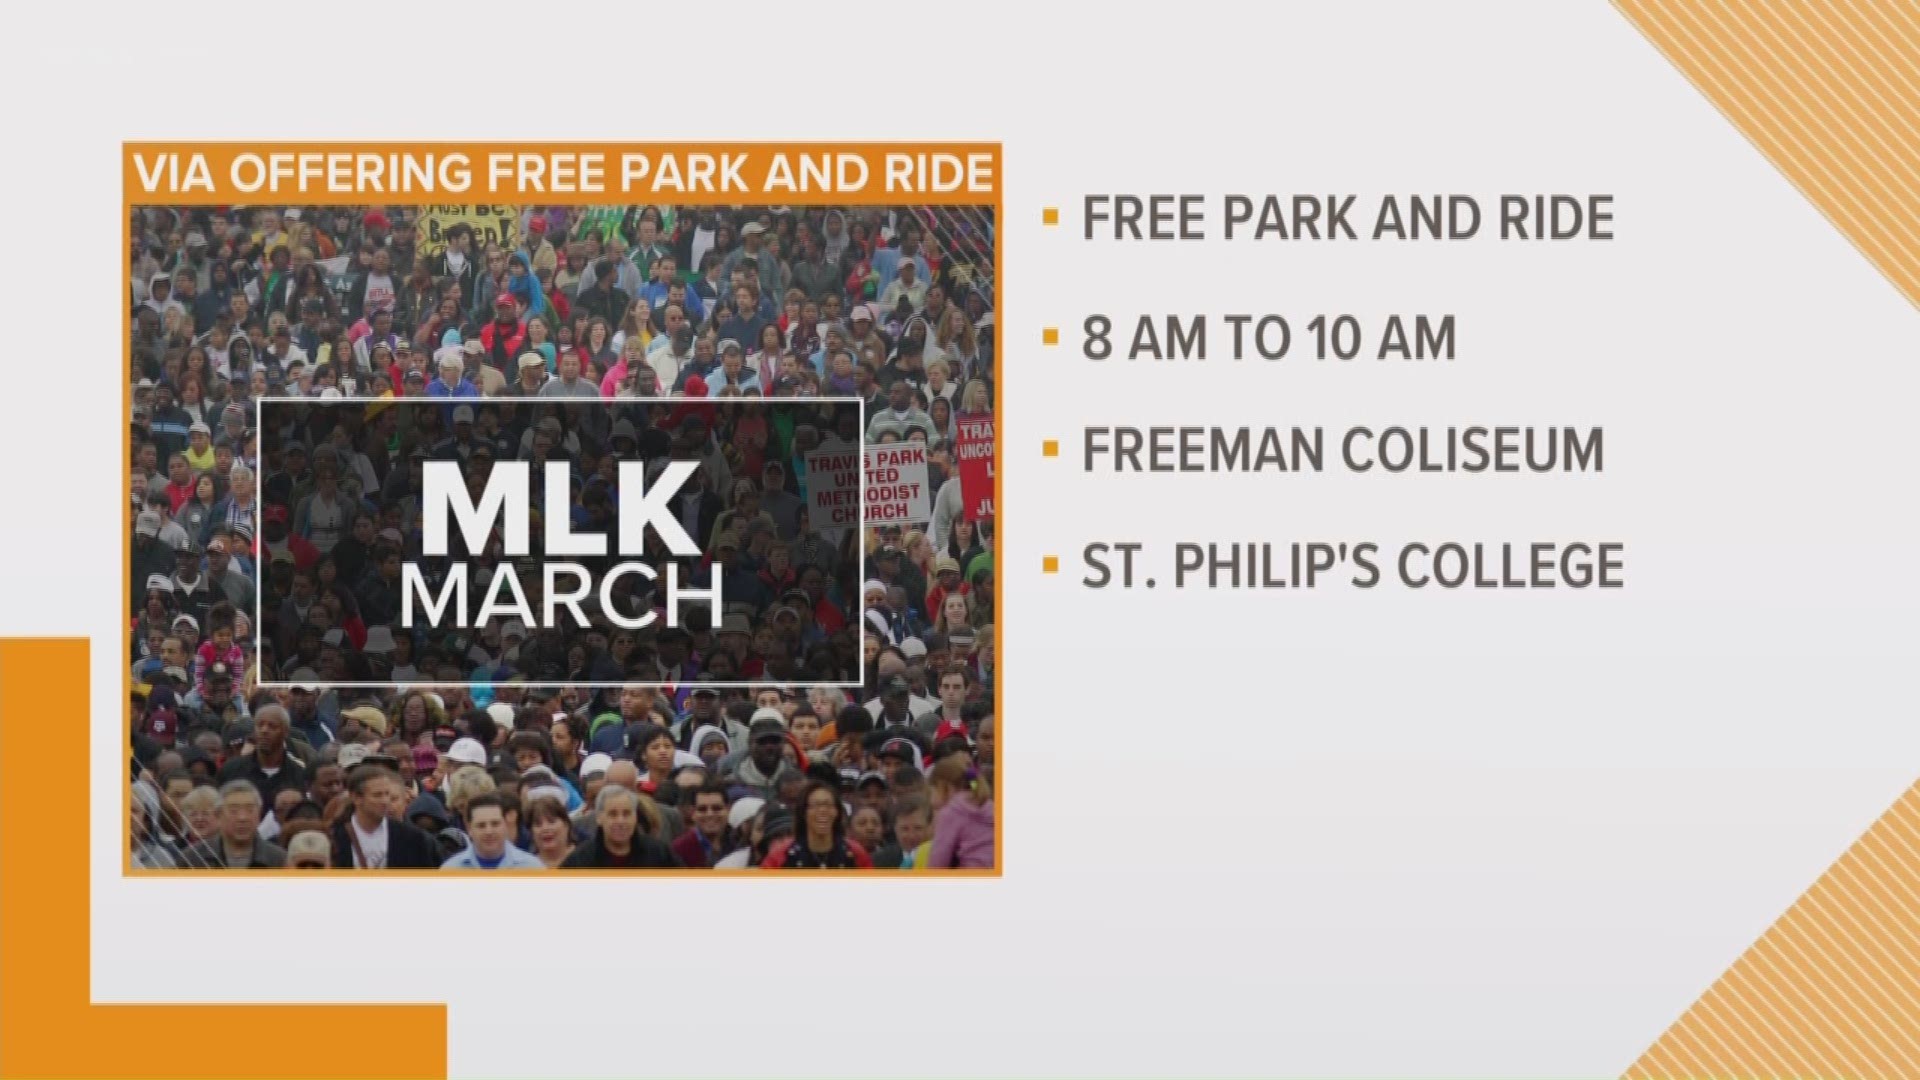 San Antonio will host the largest MLK march in the country on Monday.